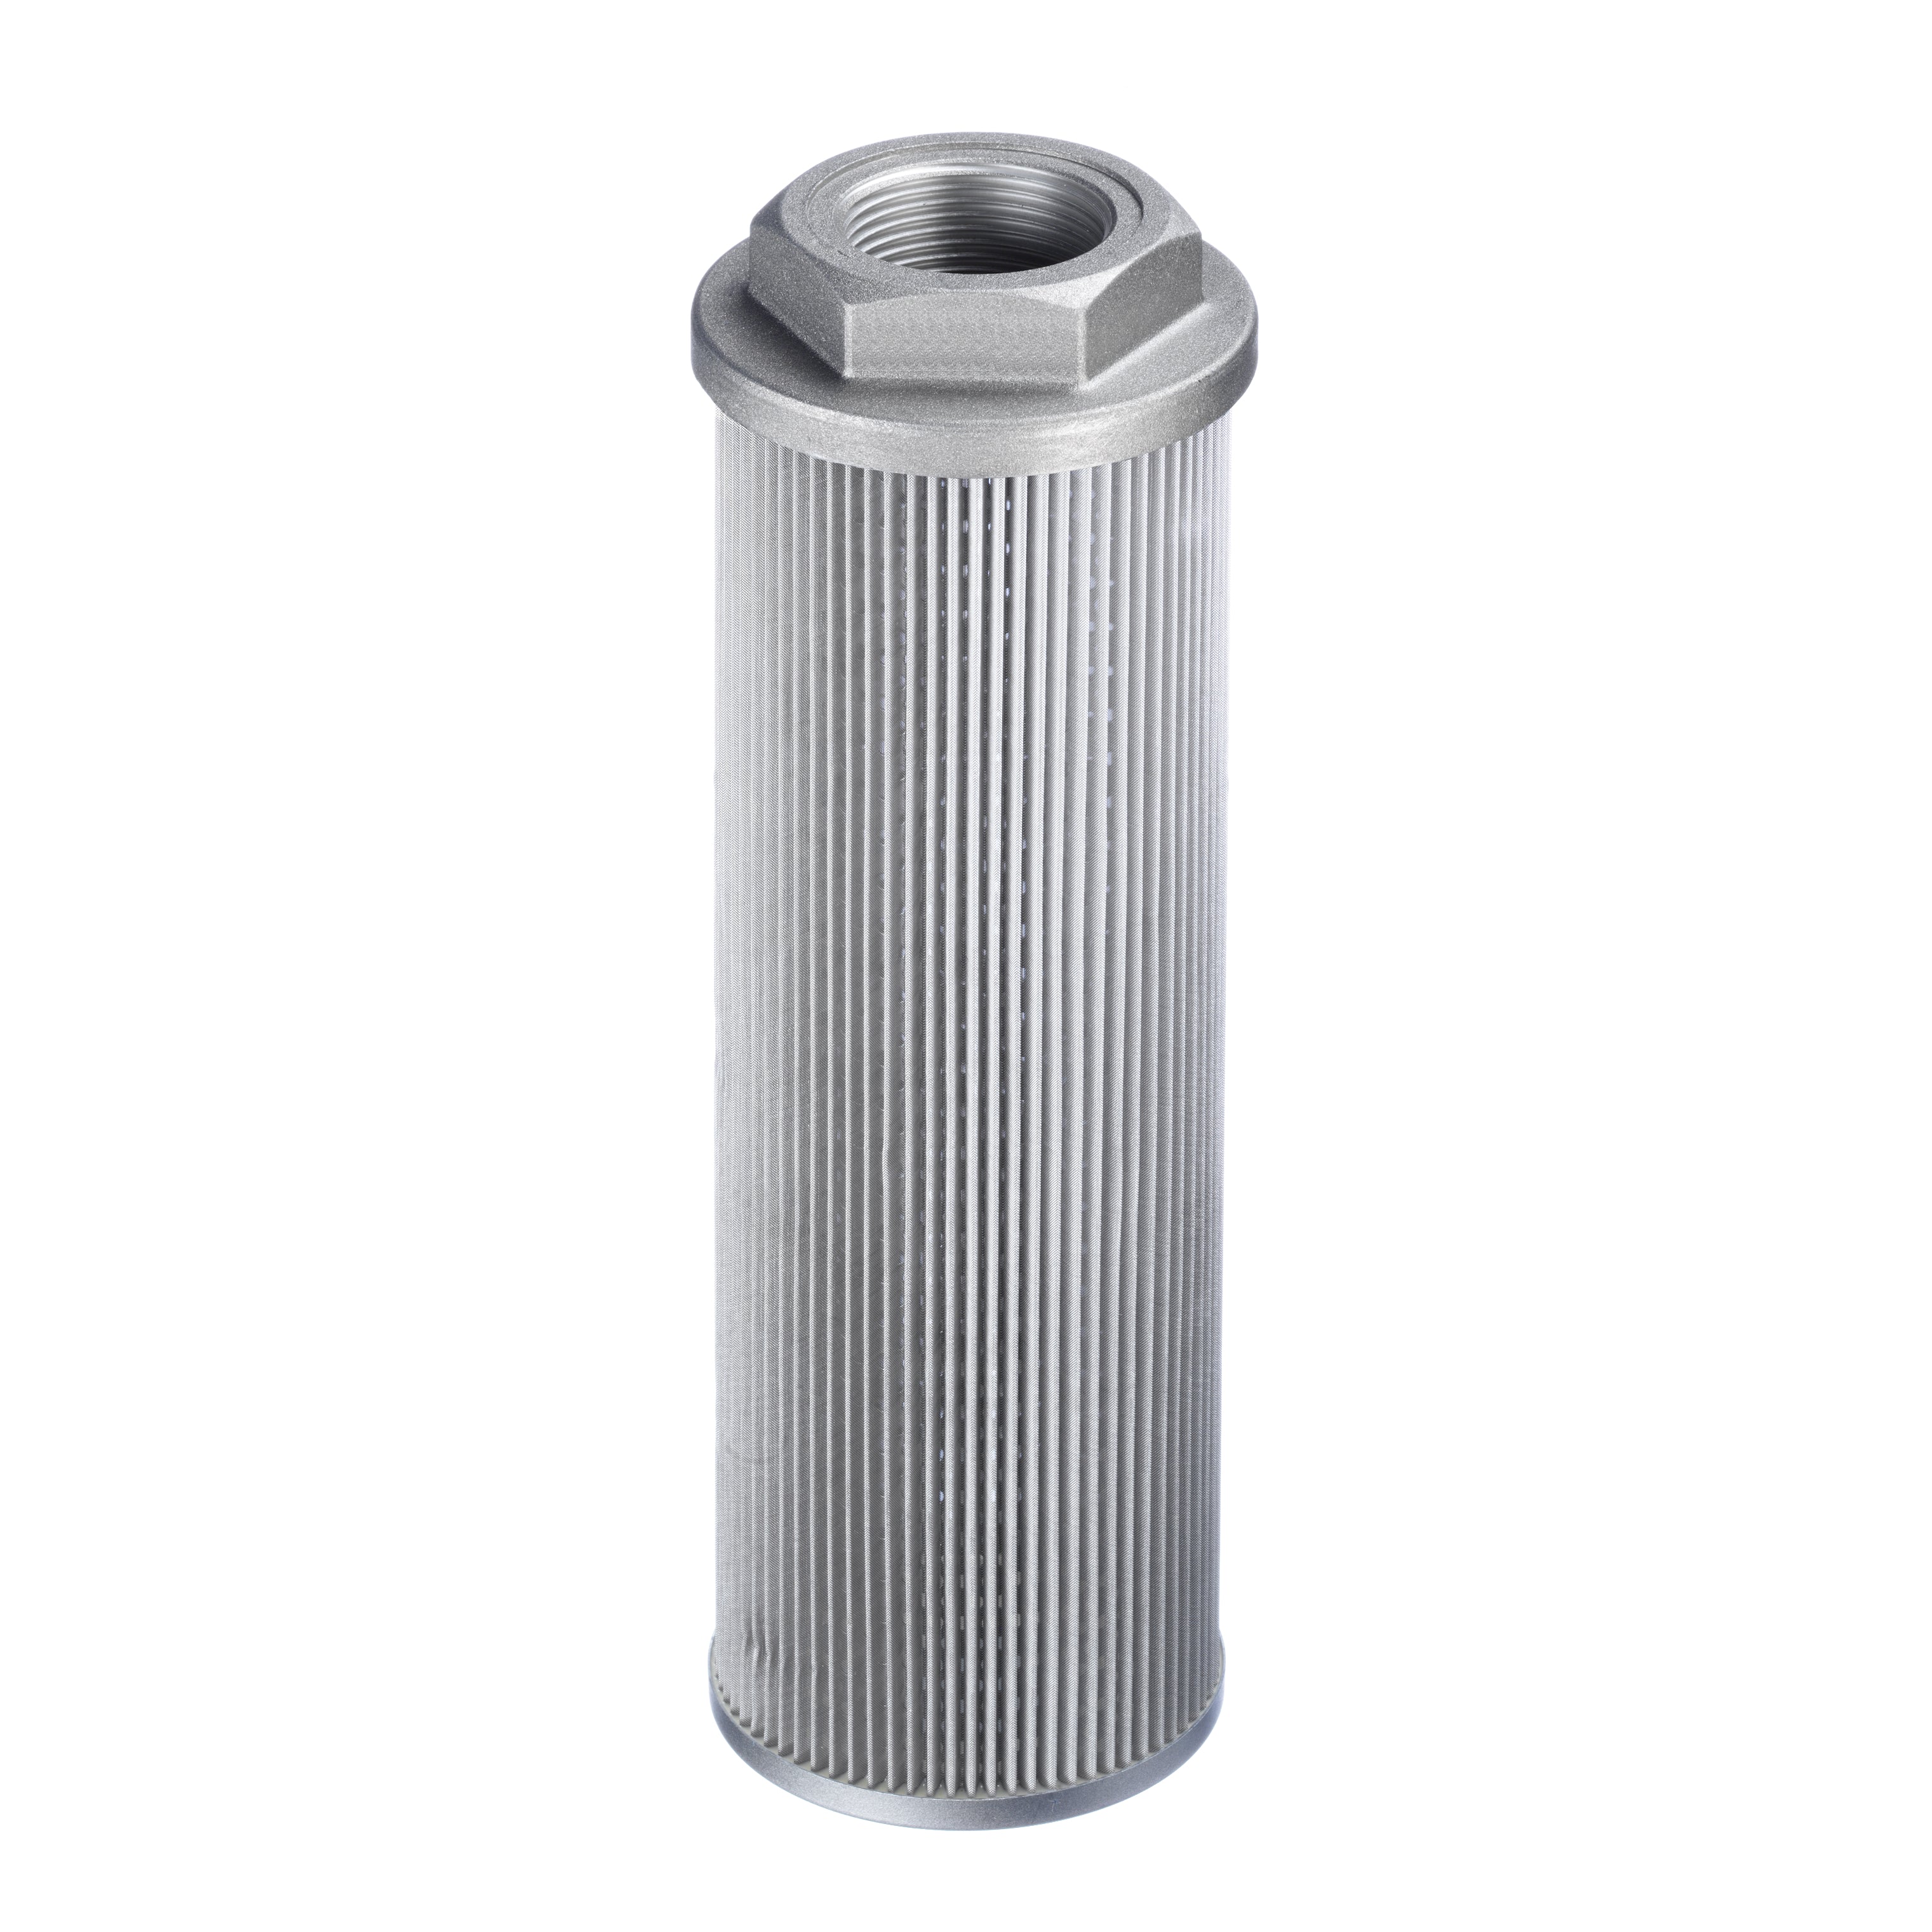 SUS-088-N32-260-125-A-O : Stauff Suction Strainer, Aluminum End Cap, 2" NPT, 59.8GPM, 125 Micron, No Bypass